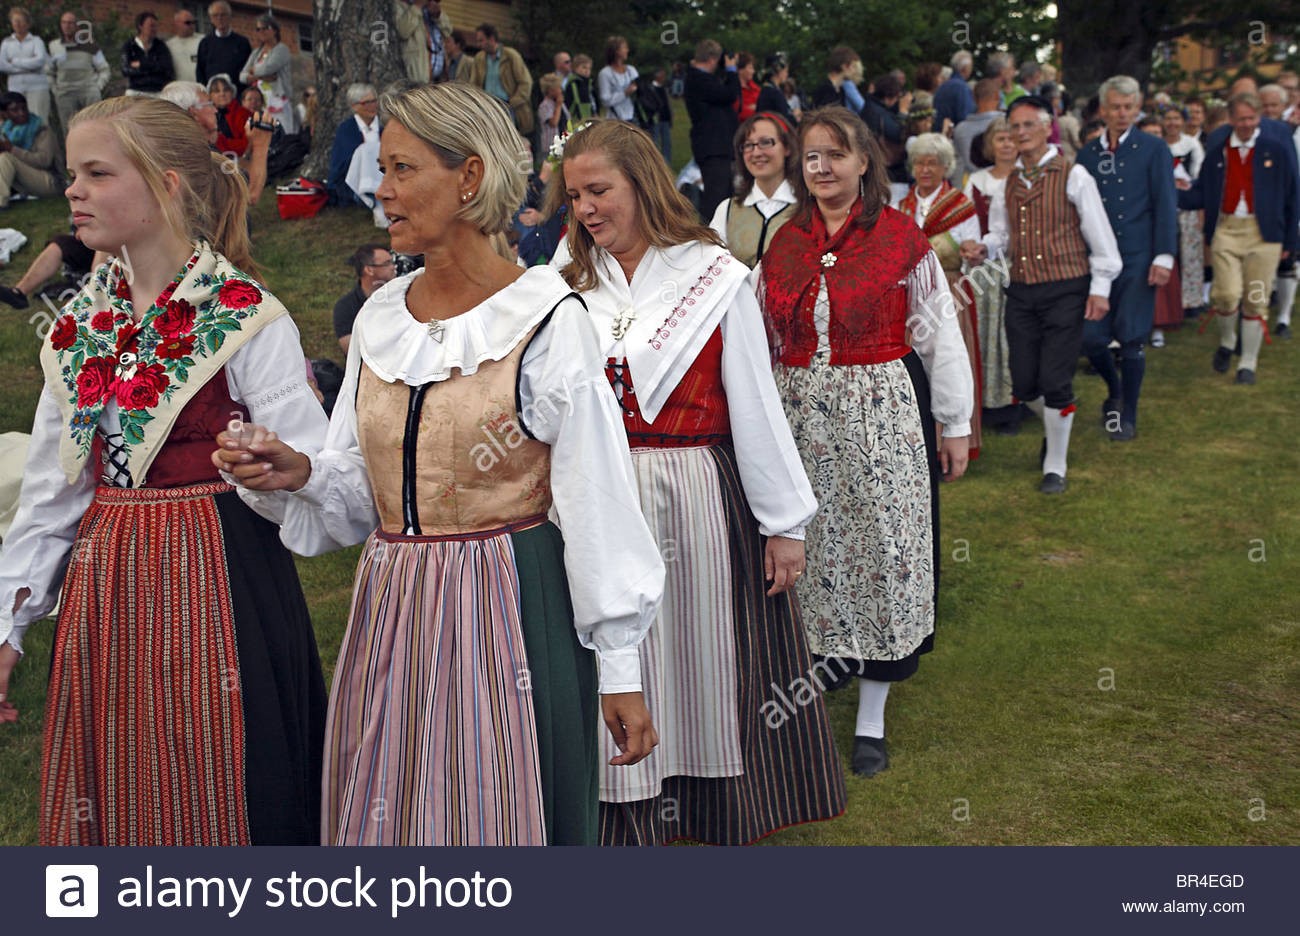 Couples in traditional Swedish folk costumes parade at midsummer celebration.